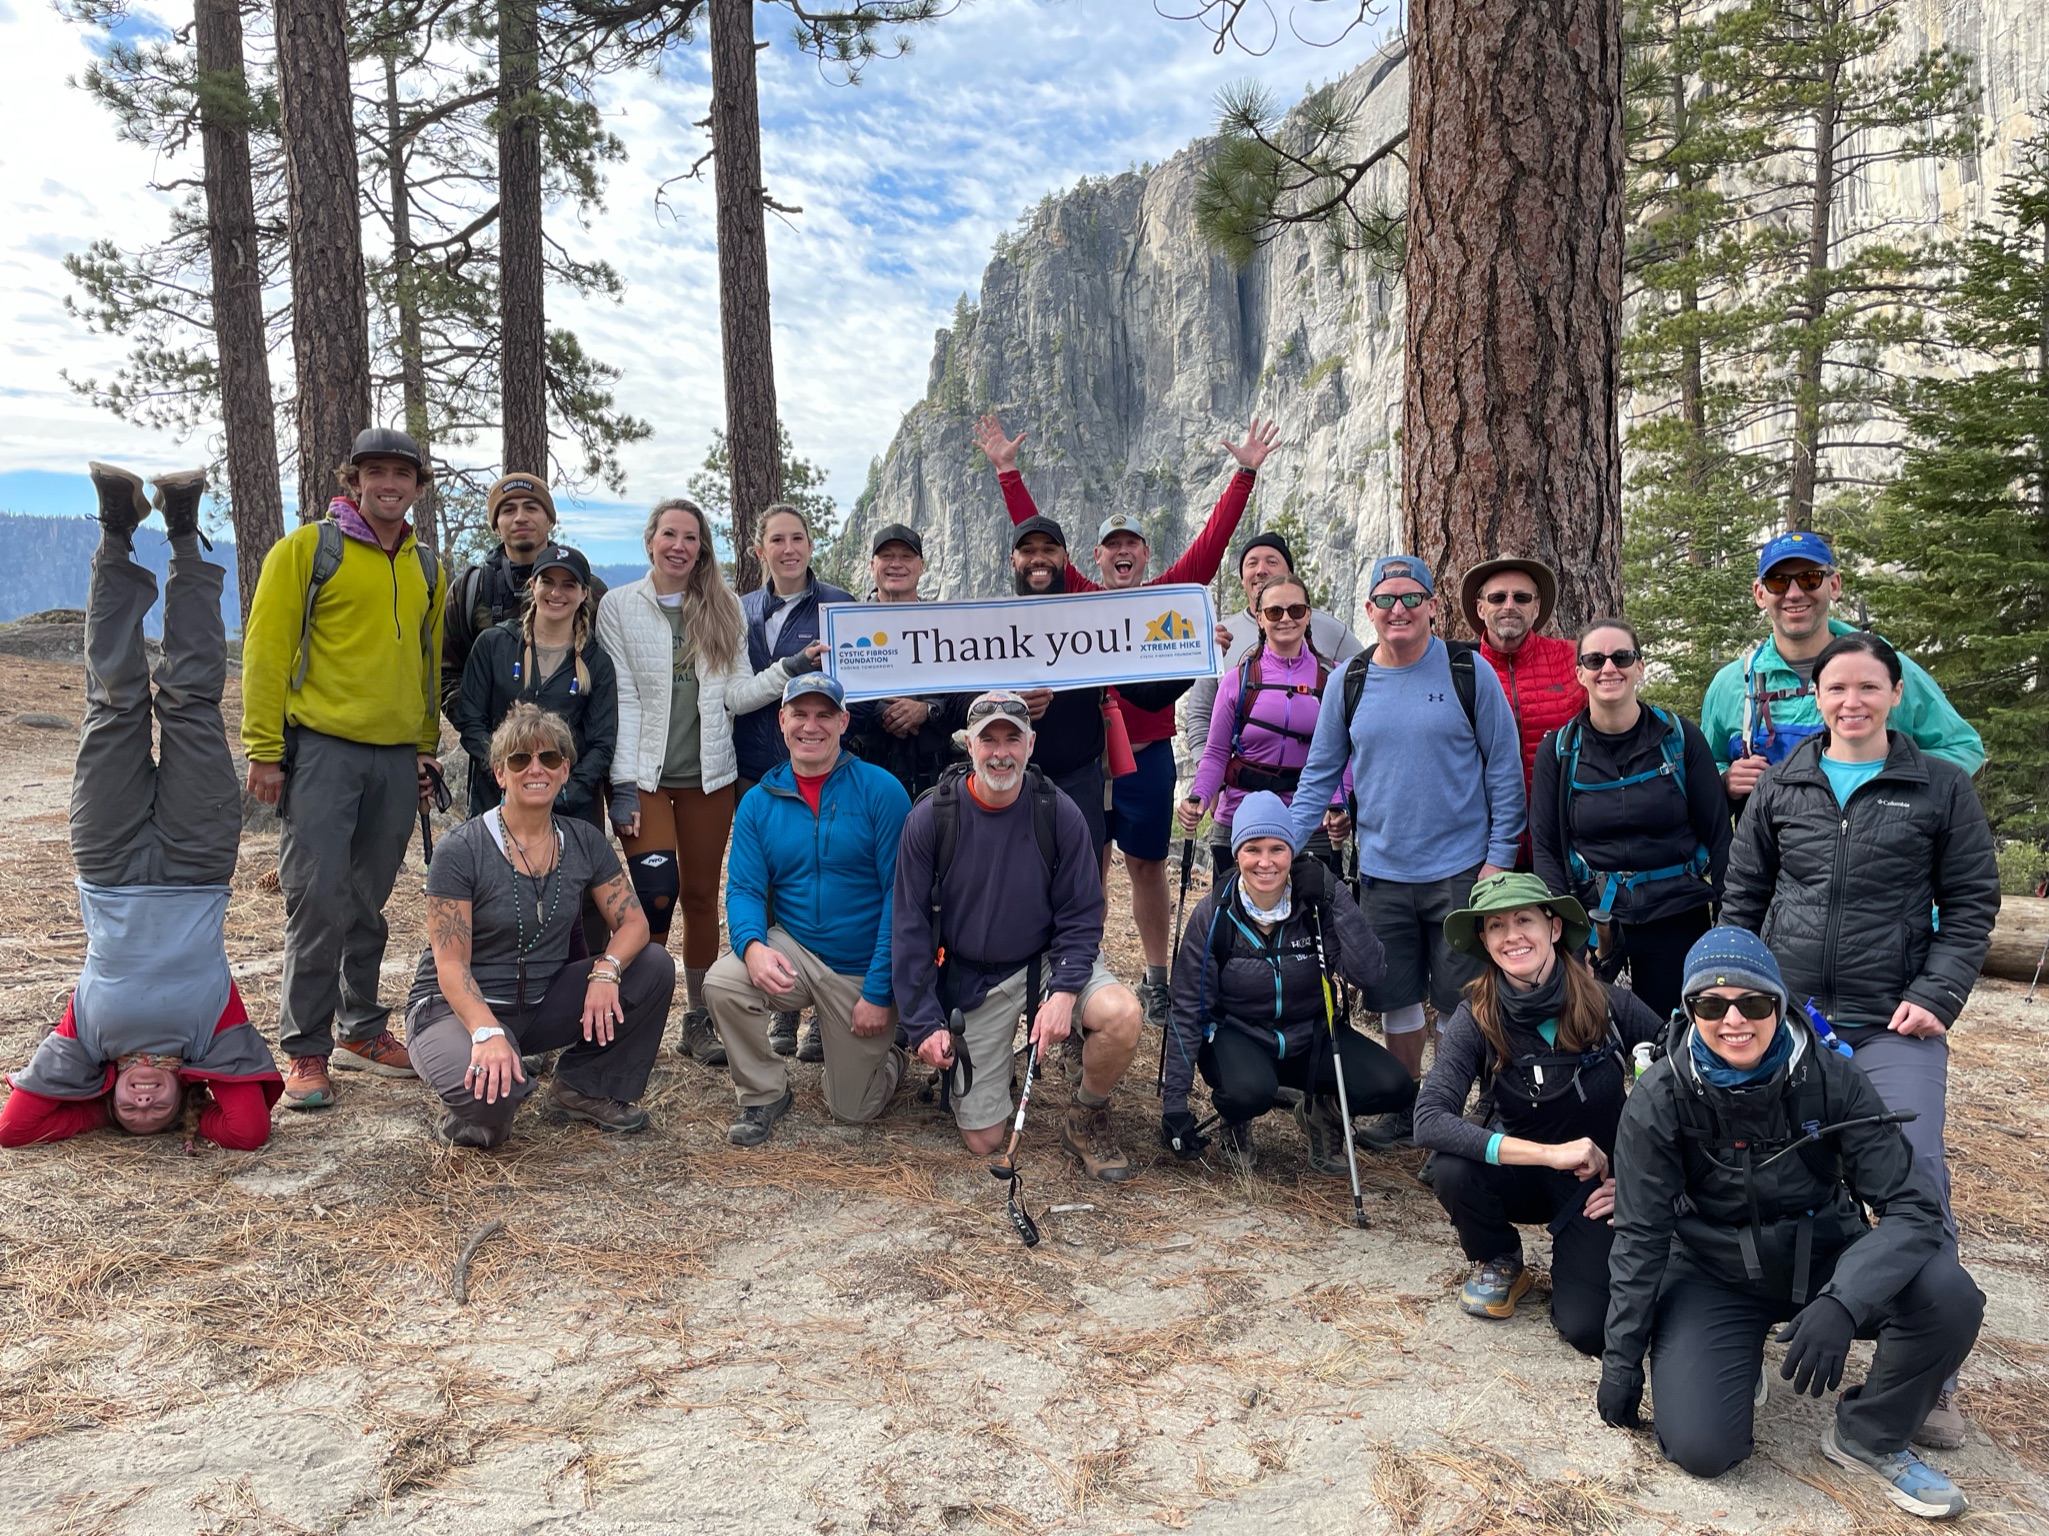 Xtreme Hike 2019 Event Page